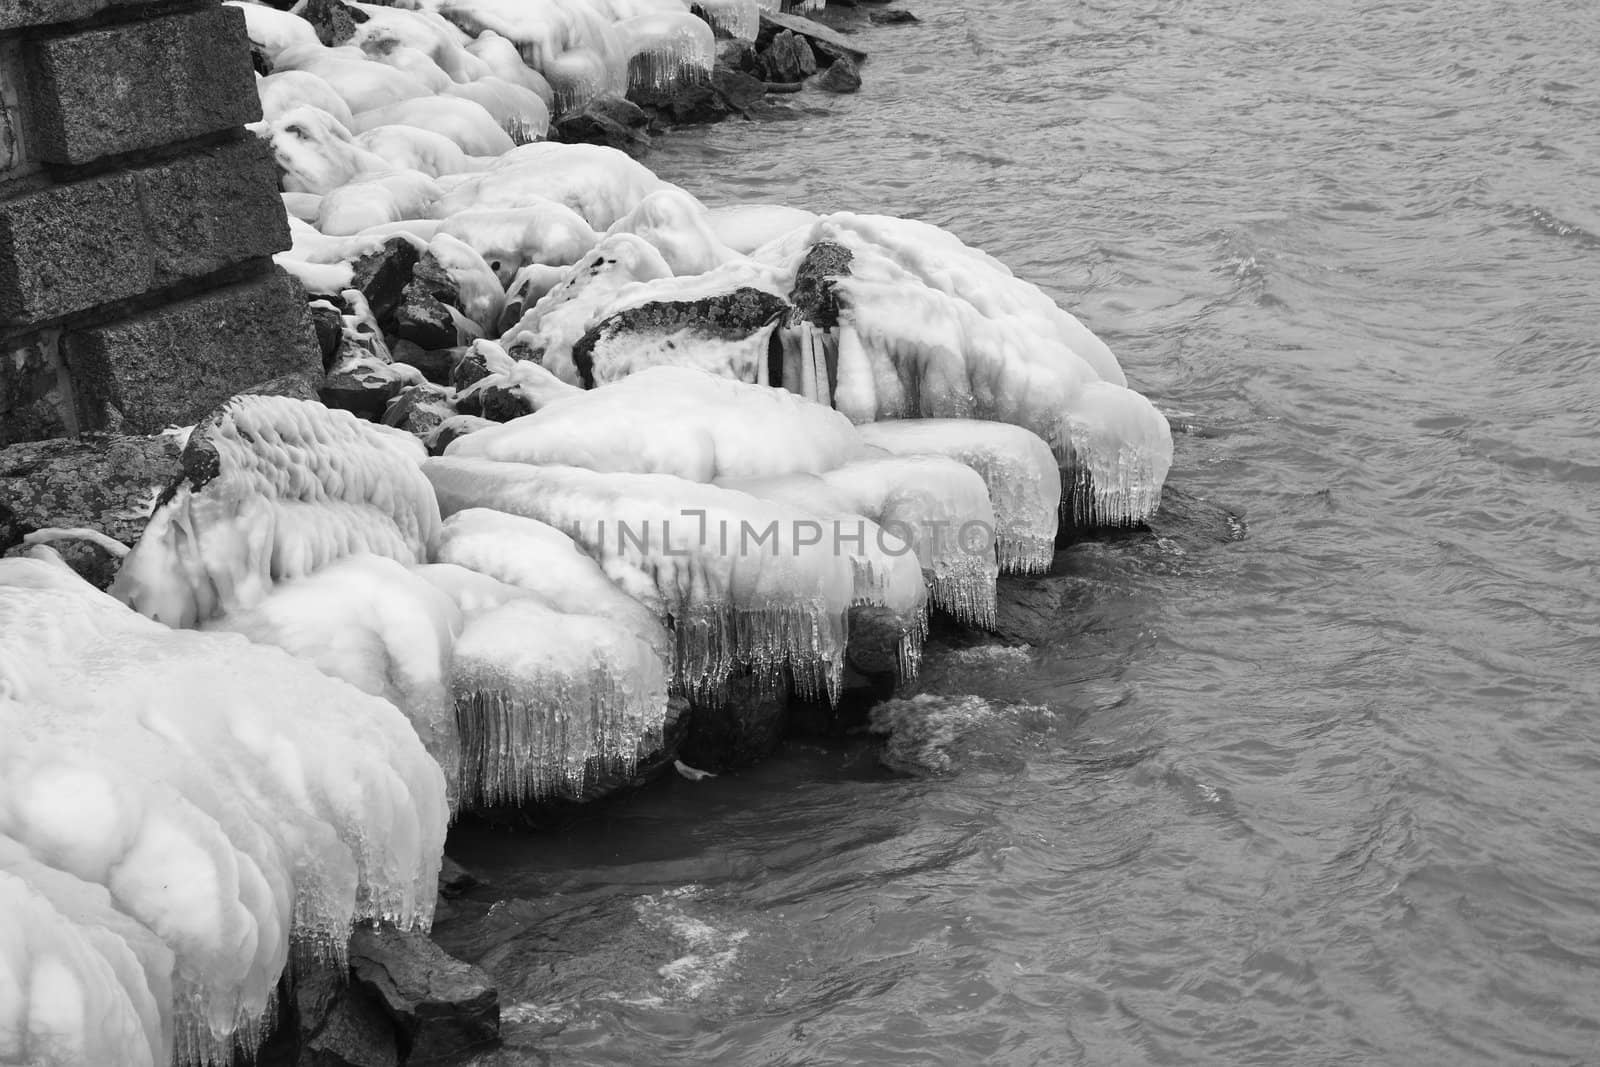 Heavy winter weather deposits ice on rocks on the water's edge